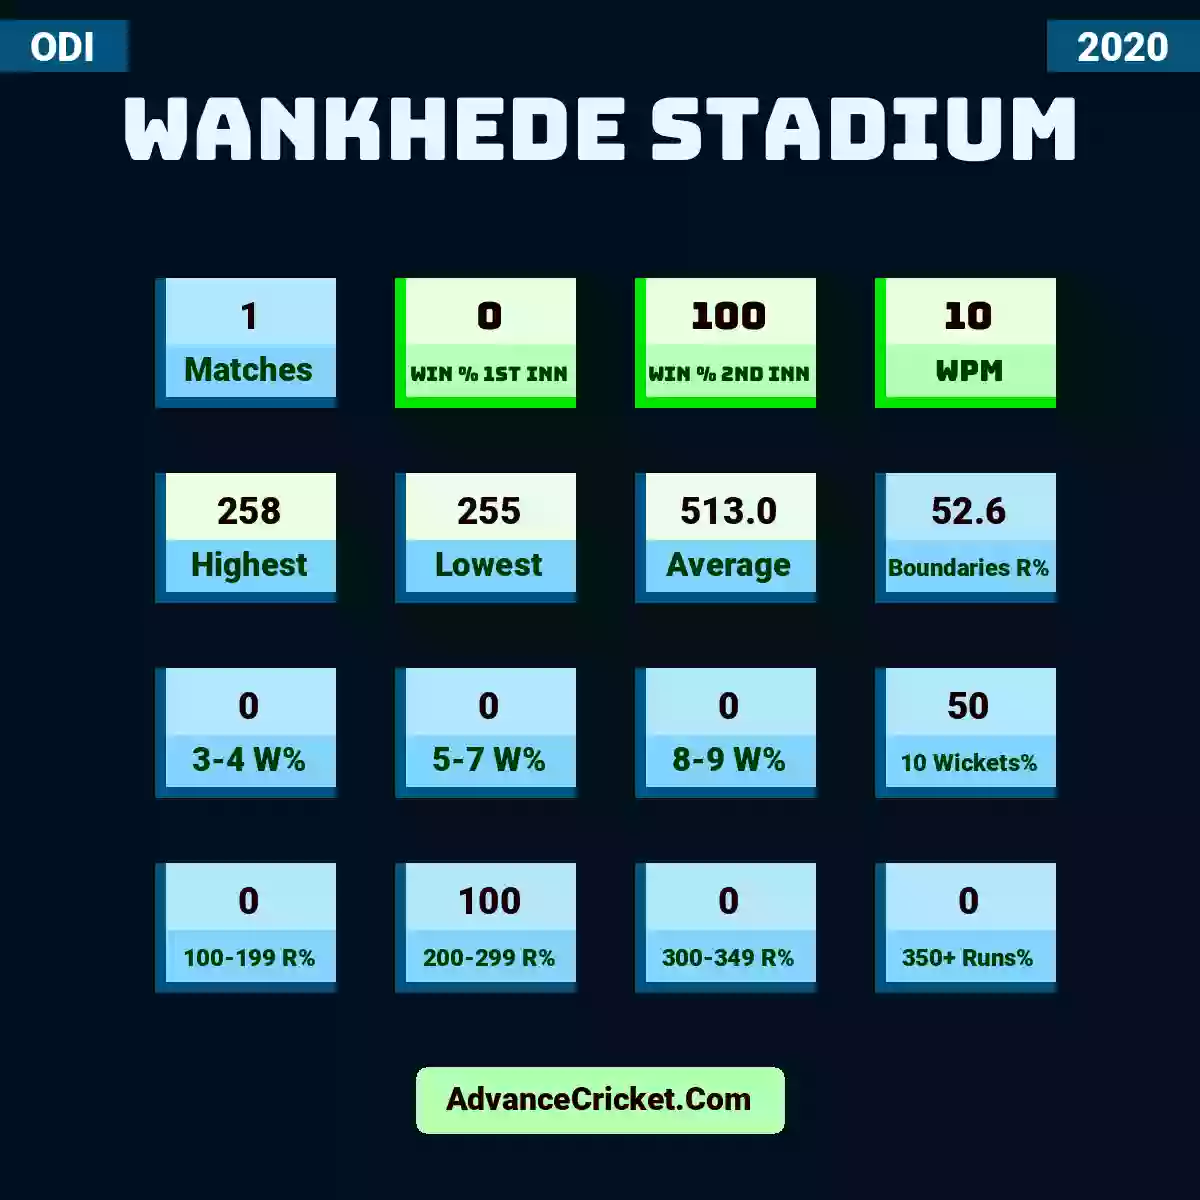 Image showing Wankhede Stadium with Matches: 1, Win % 1st Inn: 0, Win % 2nd Inn: 100, WPM: 10, Highest: 258, Lowest: 255, Average: 513.0, Boundaries R%: 52.6, 3-4 W%: 0, 5-7 W%: 0, 8-9 W%: 0, 10 Wickets%: 50, 100-199 R%: 0, 200-299 R%: 100, 300-349 R%: 0, 350+ Runs%: 0.